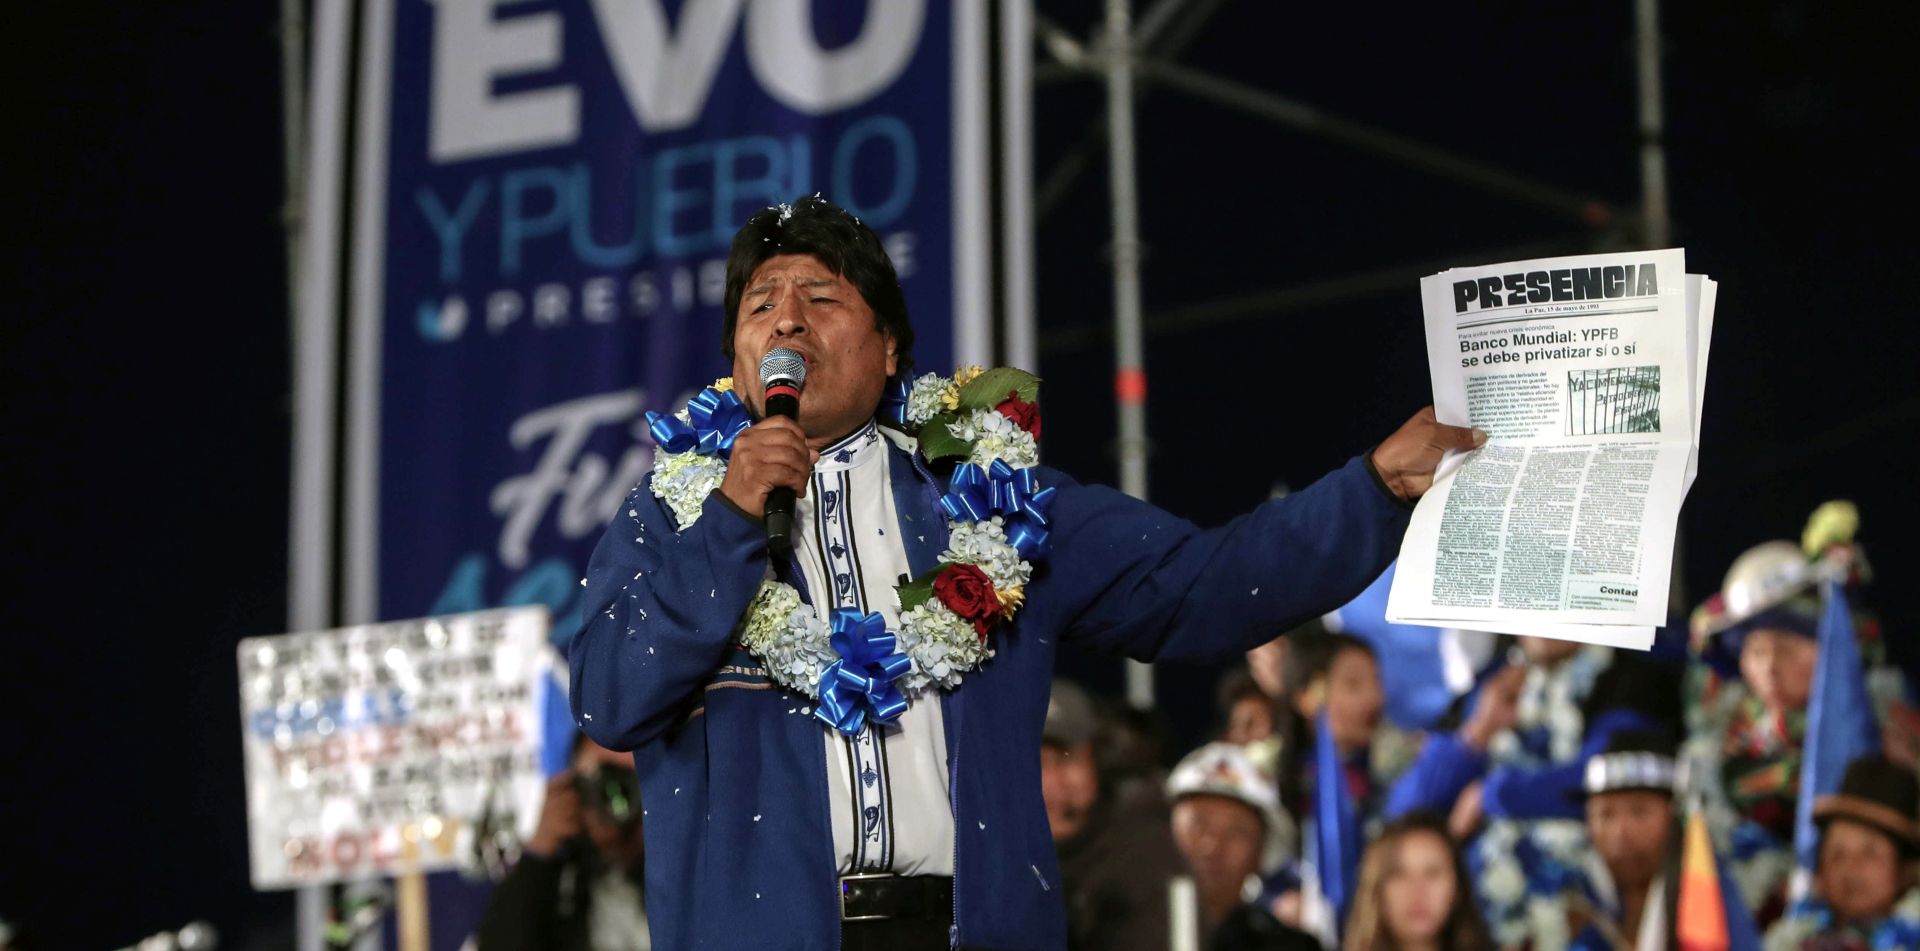 epa07926347 The President of Bolivia Evo Morales (C) addresses his supporters during a rally marking the closing of his electoral campaign, in the city of El Alto, Bolivia, 16 October 2019. Morales, who has served as Bolivia's president since 2006, is running for a fourth term in office. The 2019 Bolivian general election is scheduled to take place on 20 October 2019.  EPA/MARTIN ALIPAZ